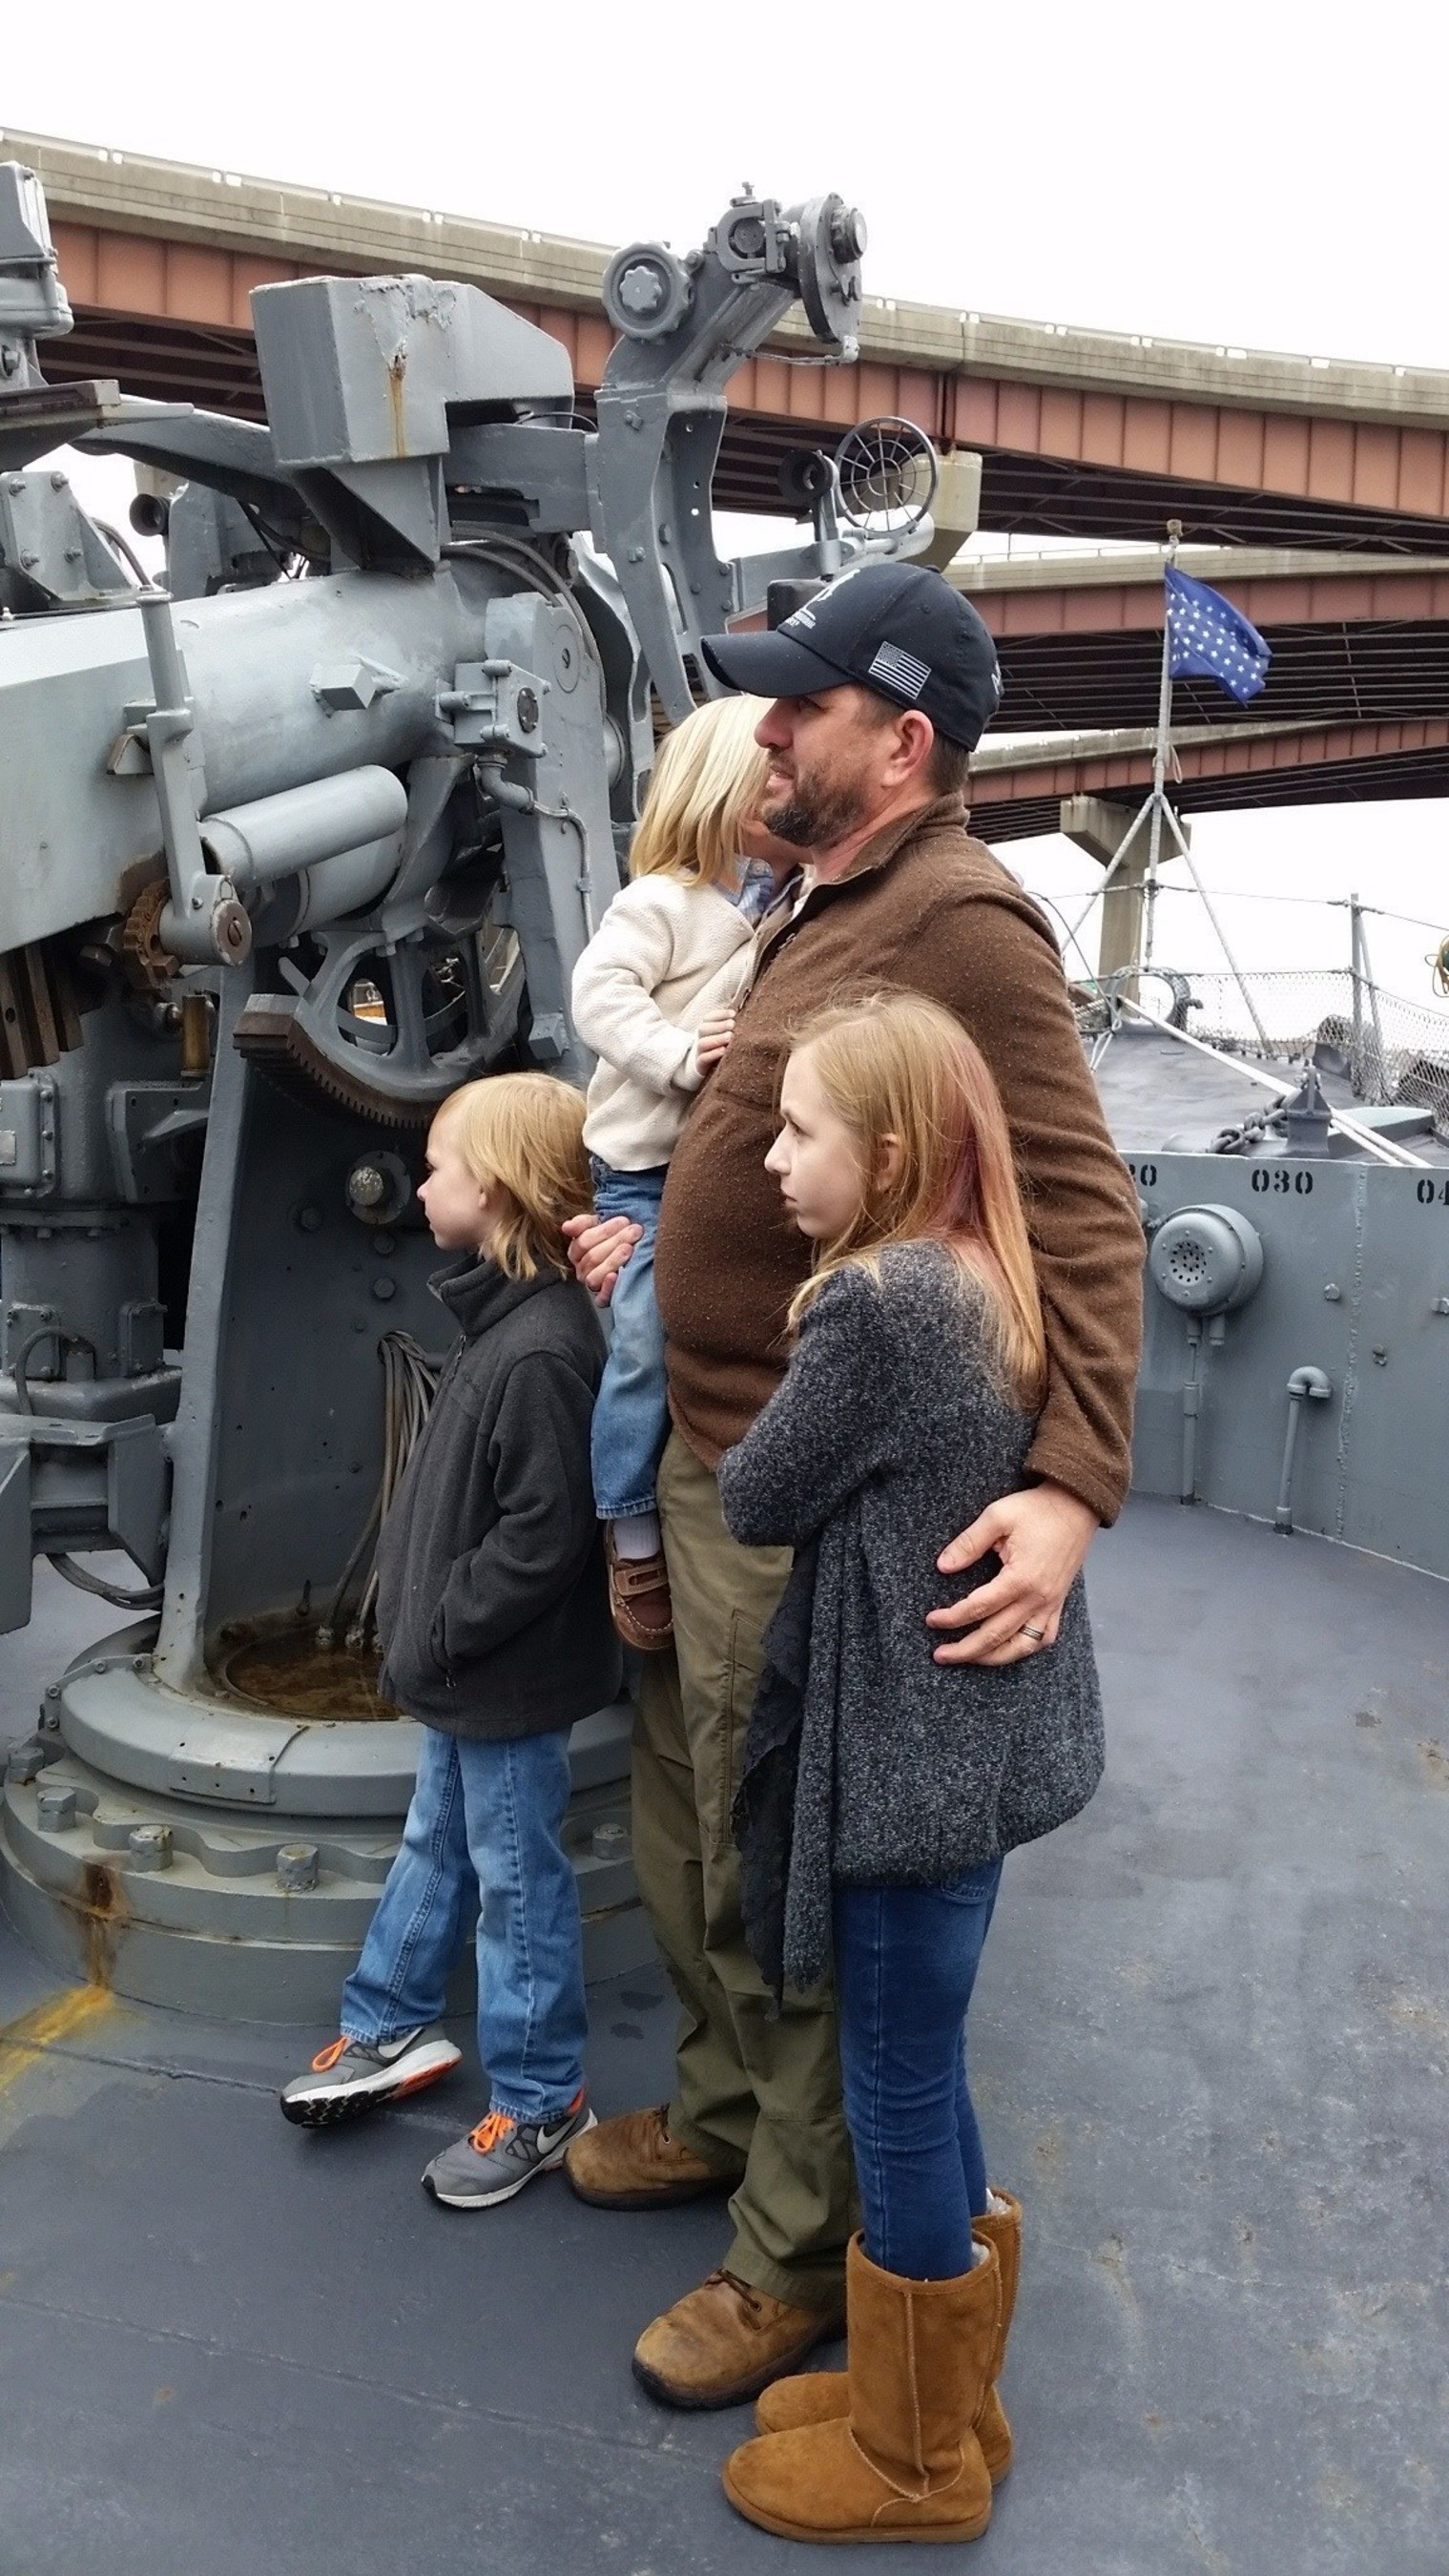 James Hogan, U.S. Navy injured veteran and Wounded Warrior Project(R) Alumnus, and his family visit the USS Slater.